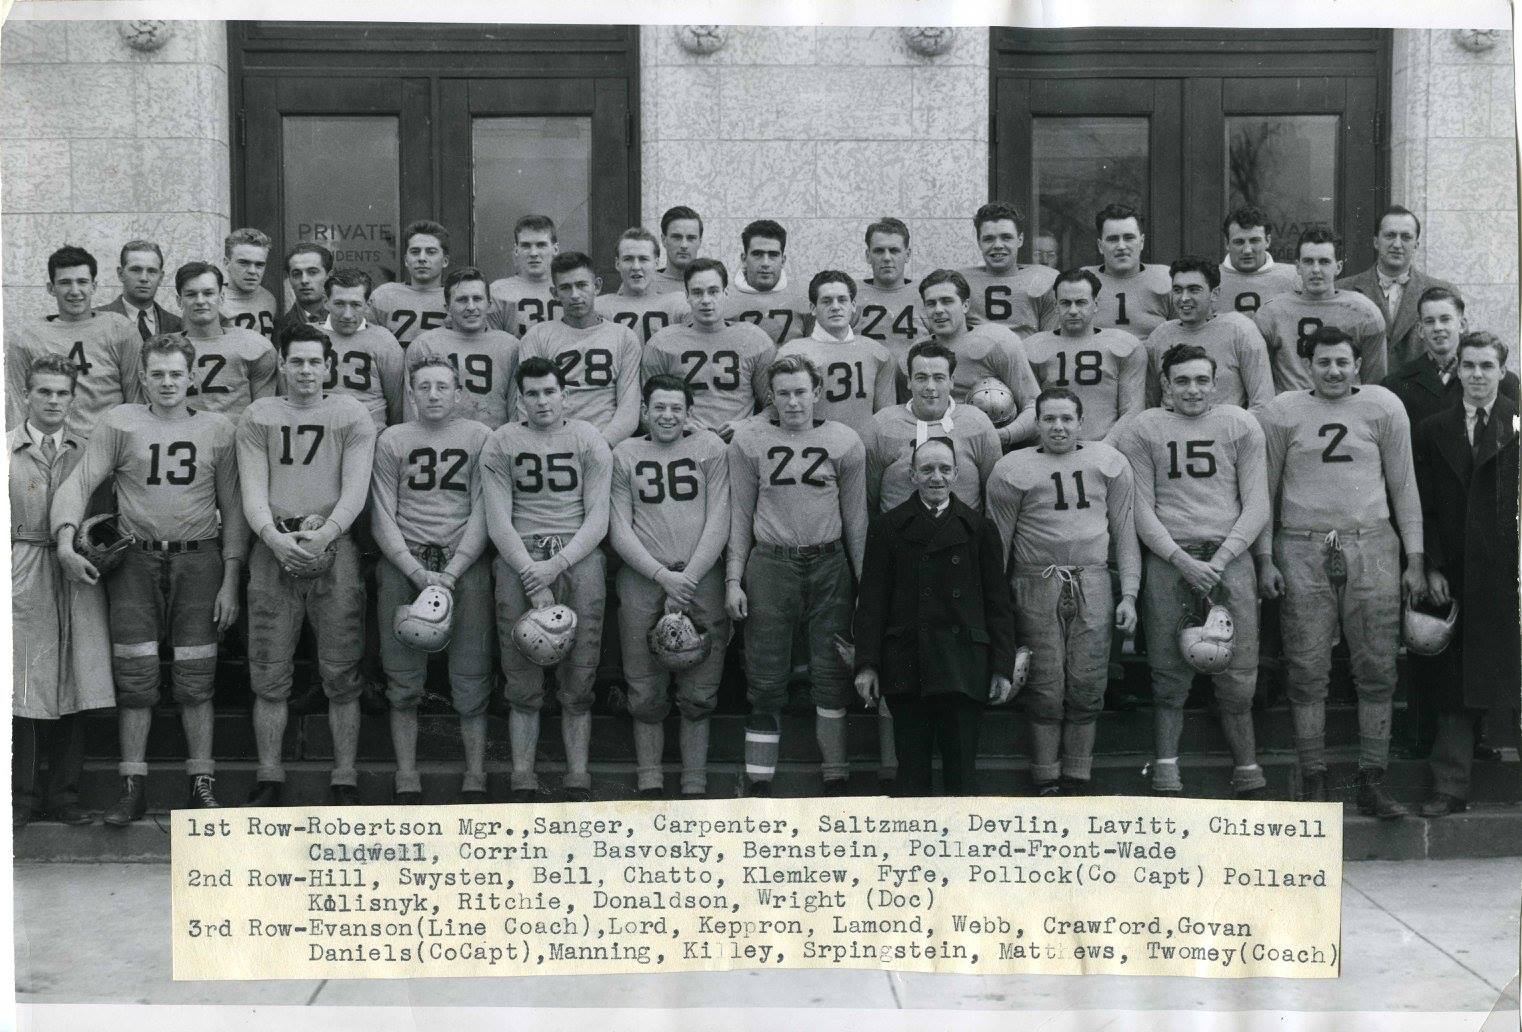 A photograph, dated 1946, of the 1946-1947 University of Manitoba Football Team. A note affixed to the front of the photograph reads: 1st Row - Robertson Mgr., Sanger, Carpenter, Saltzman, Devlin, Lavitt, Chiswell, Caldwell, Corrin, Basvosky, Bernstein, Pollard - Front - Wade / 2nd Row - Hill, Swysten, Bell, Chatto, Klemkew, Fyfe, Pollock (Co Capt), Pollard, Kolisnyk, Ritchie, Donaldson, Wright (Doc) / 3rd Row - Evanson (Line Coach), Lord, Keppron, Lamond, Webb, Crawford, Govan, Daniels (Co Capt), Manning, Killey, Srpingstein (sic), Matthews, Twomey (Coach).<br />
Source: Faculty of Physical Education and Recreational Studies fonds